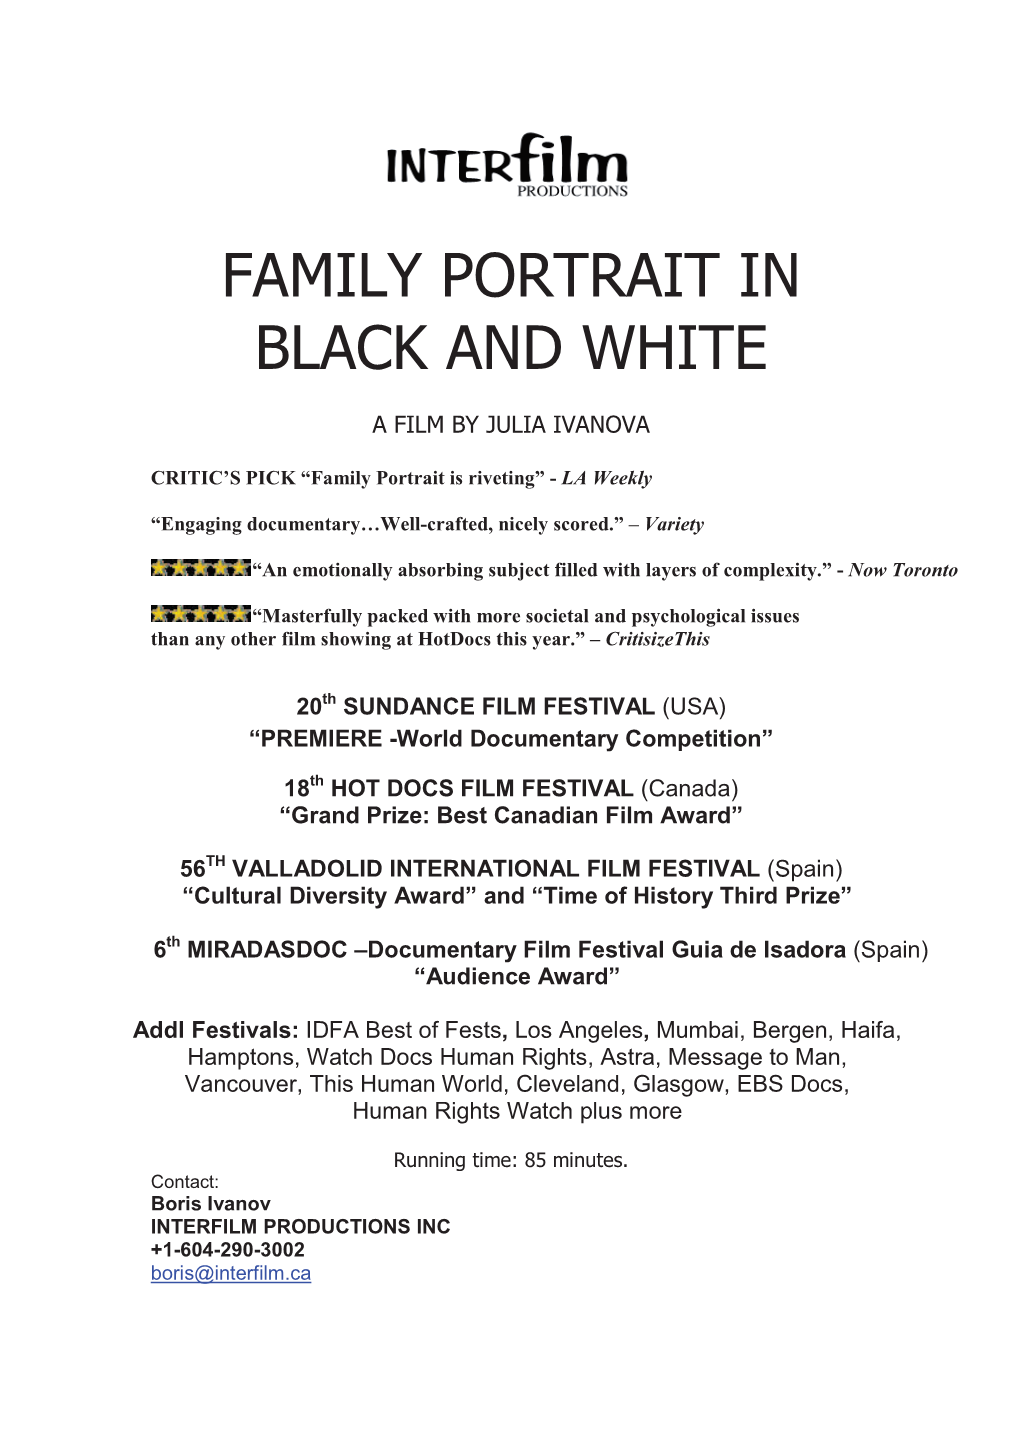 Family Portrait in Black and White - Entertainment News, Film Reviews